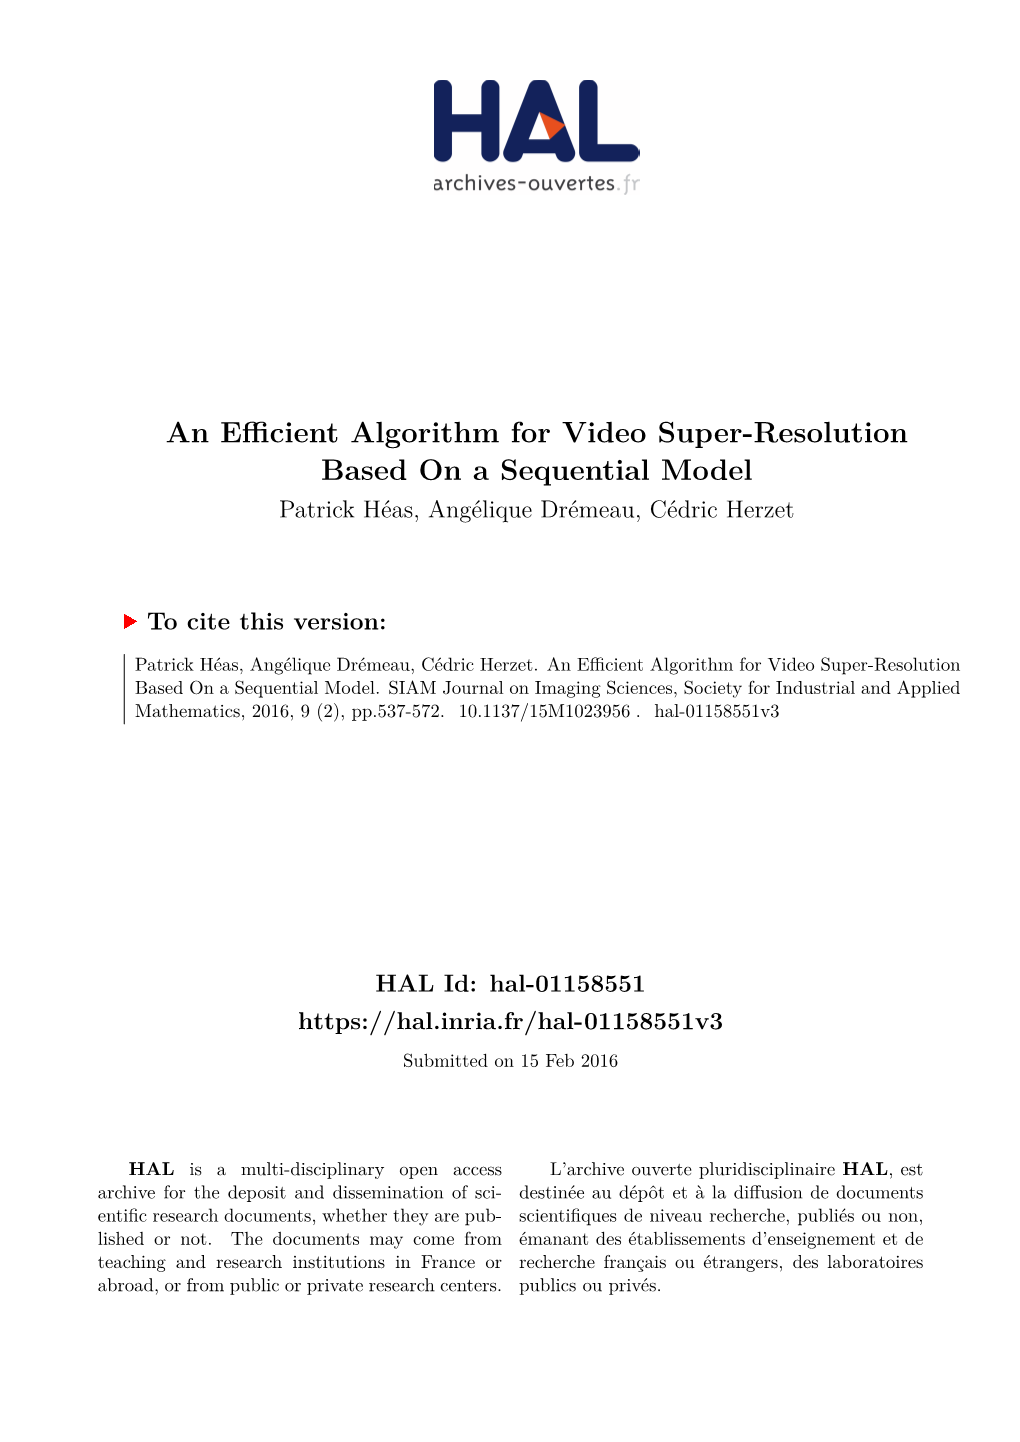 An Efficient Algorithm for Video Super-Resolution Based on a Sequential Model